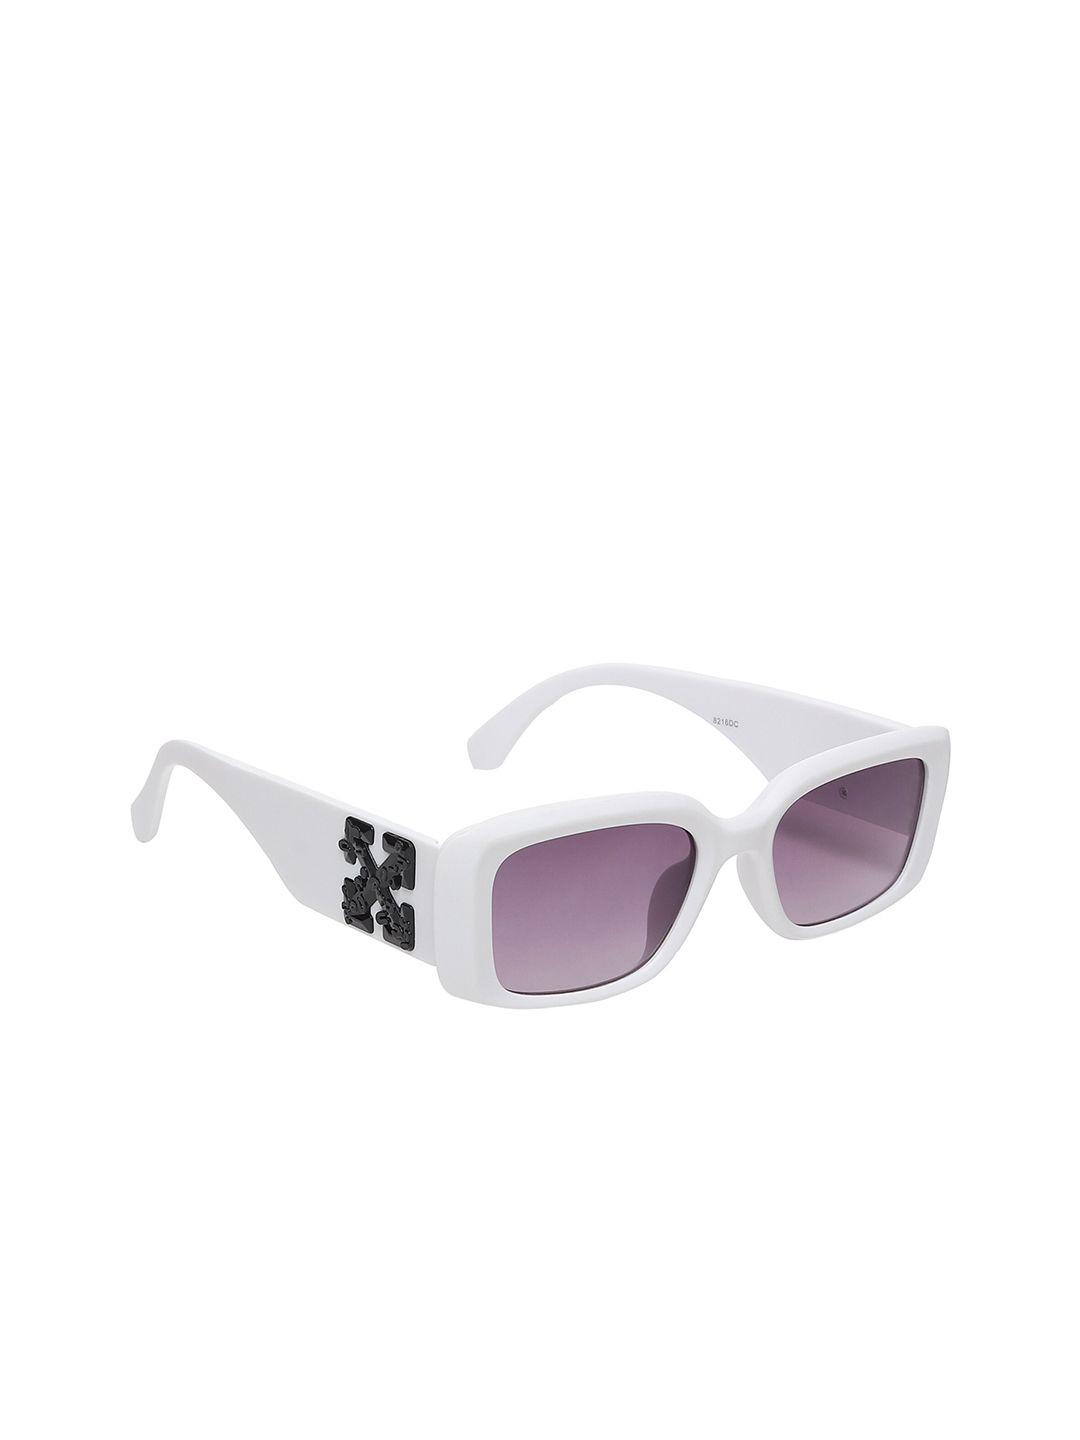 Swiss Design Unisex Purple Lens & White Other Sunglasses with UV Protected Lens